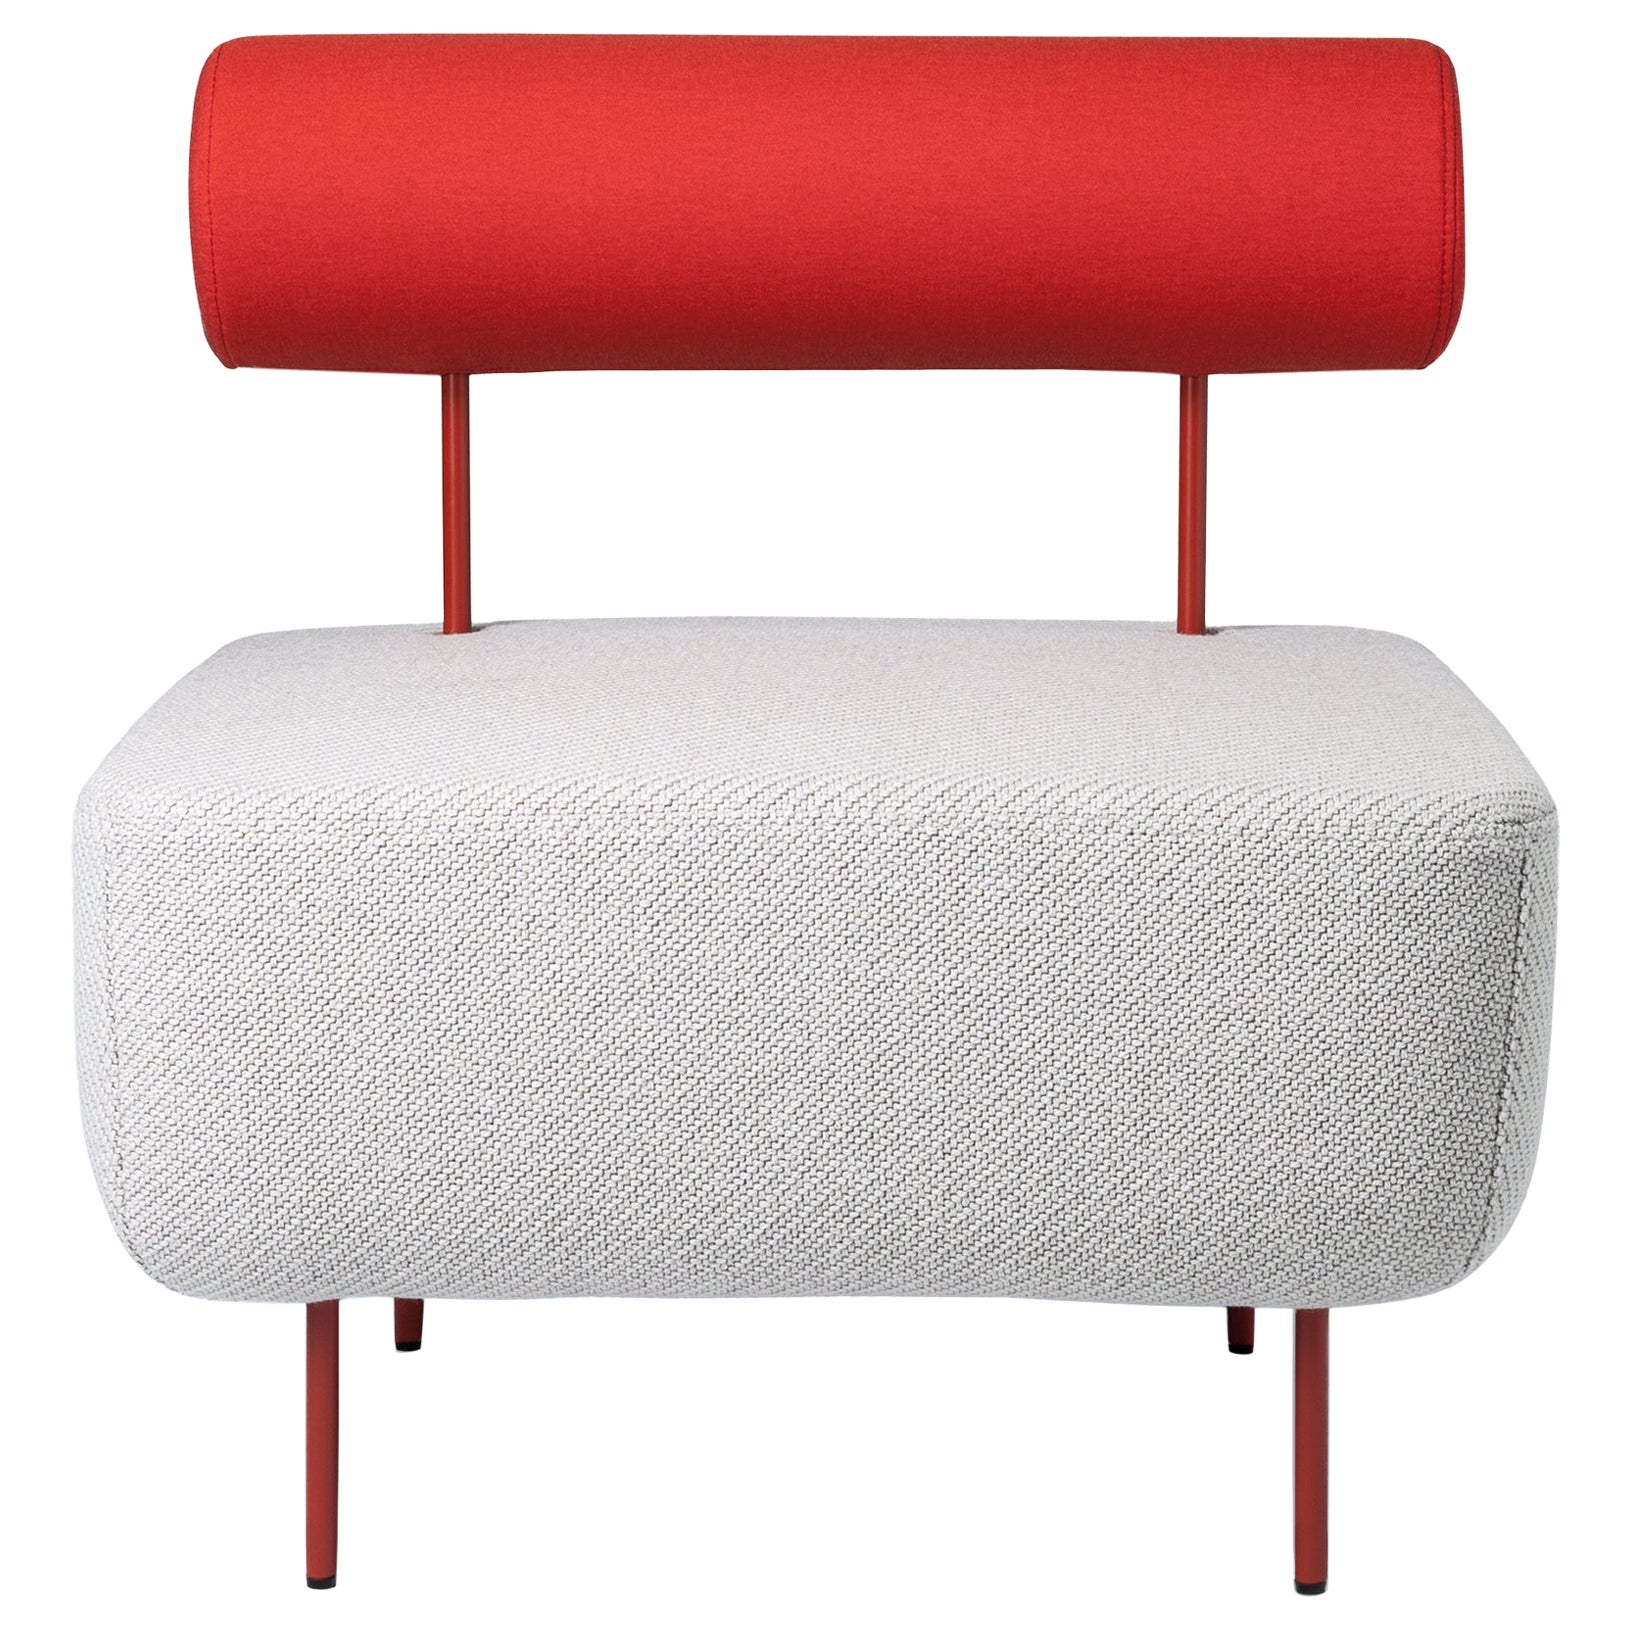 Petite Friture Medium Hoff Armchair in White and Red by Morten & Jonas, 2015 For Sale